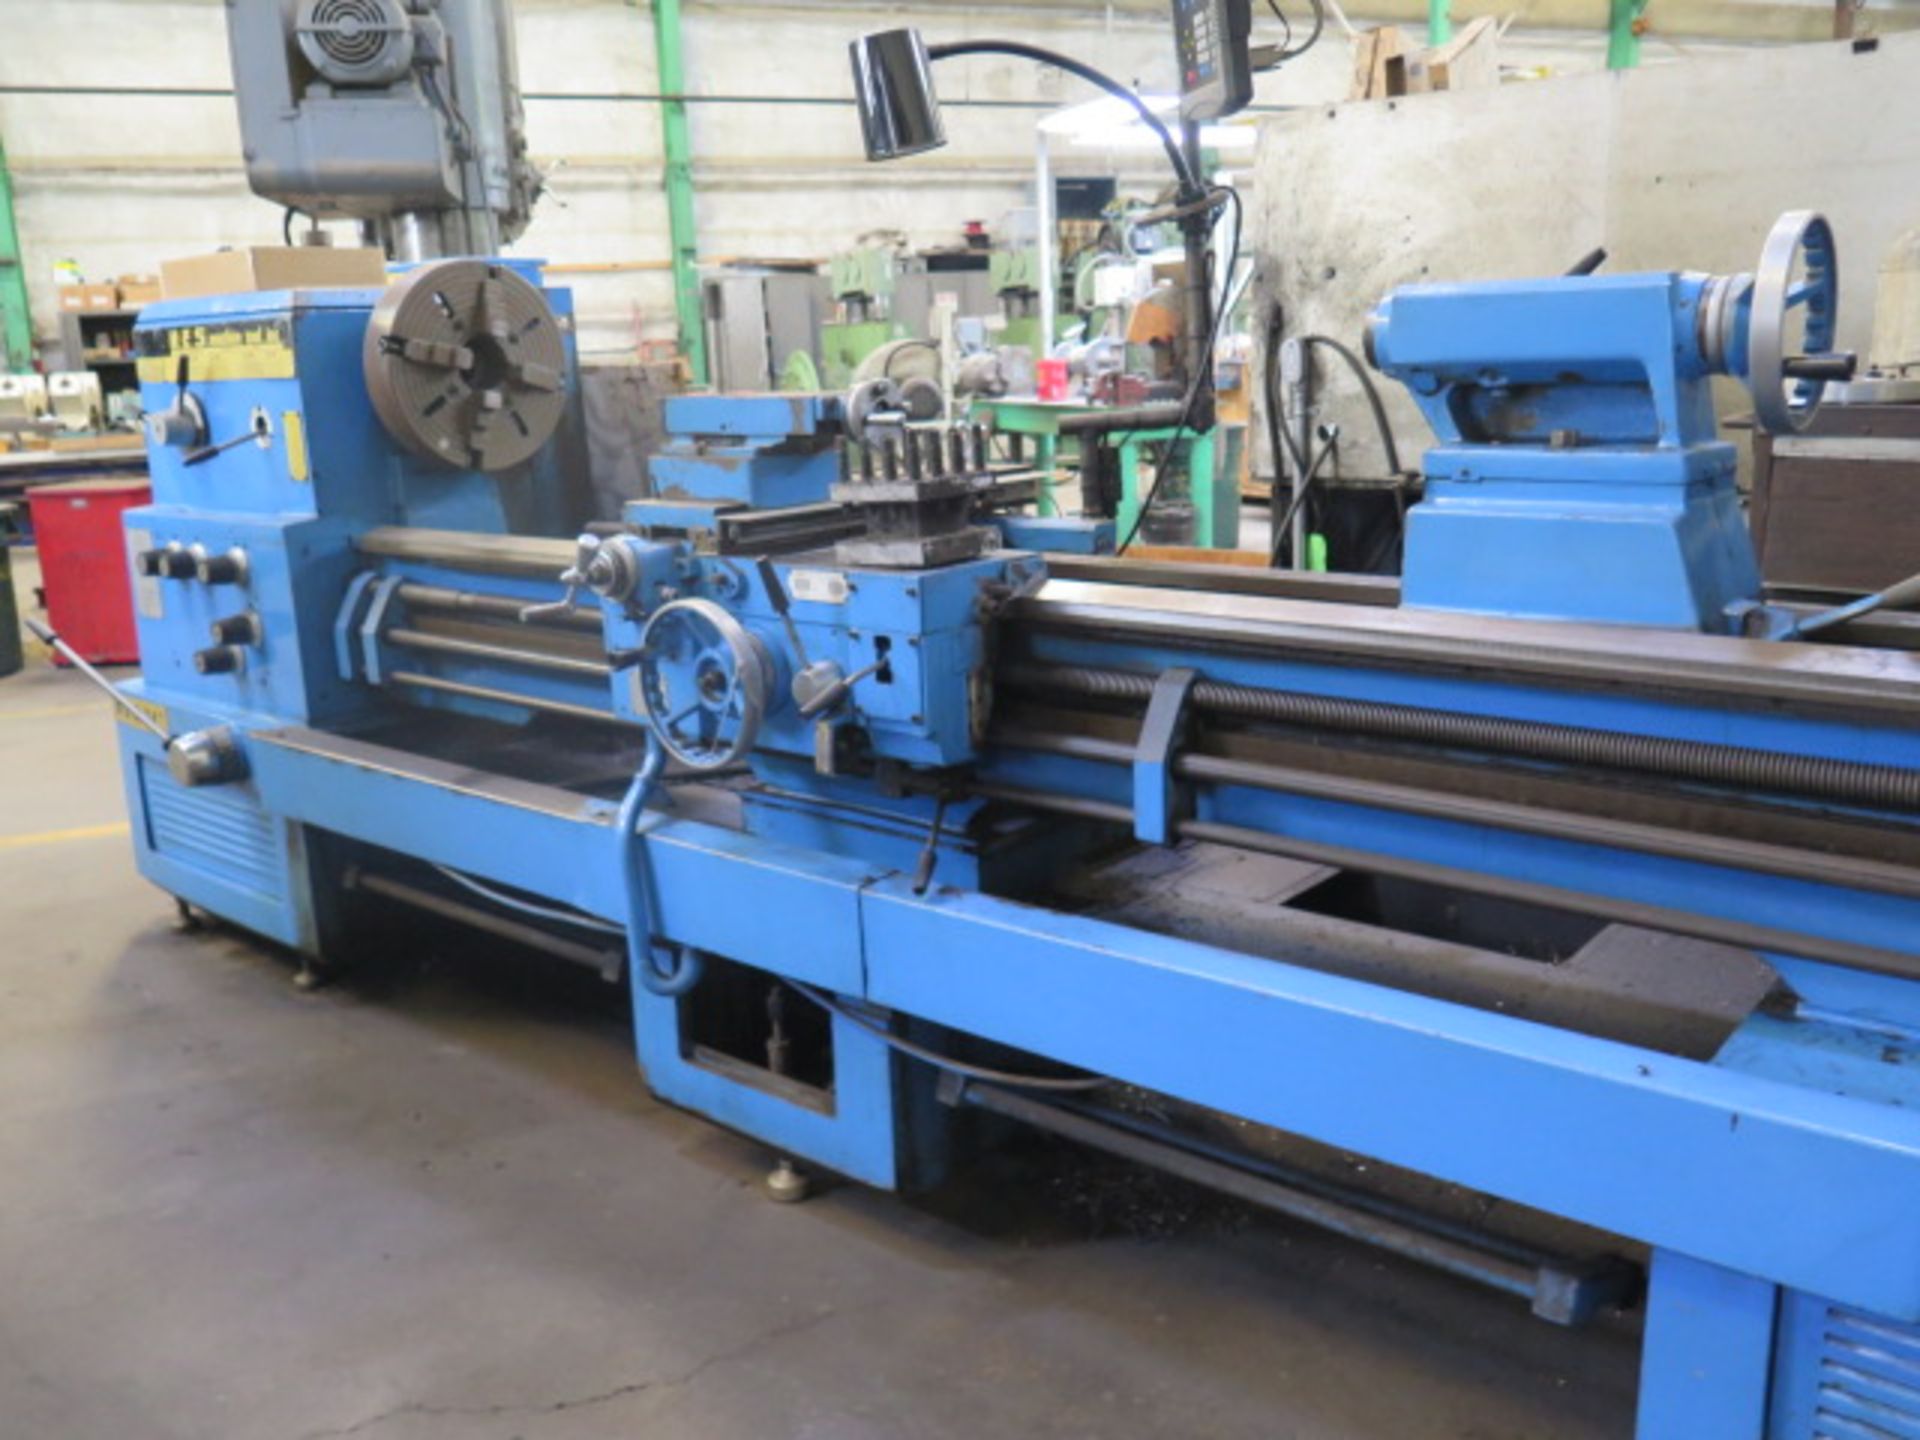 HES 24” x 108” Geared Head Gap Bed Lathe s/n 15239 w/ Newall C80 DRO, 24-960 RPM, SOLD AS IS - Image 3 of 19